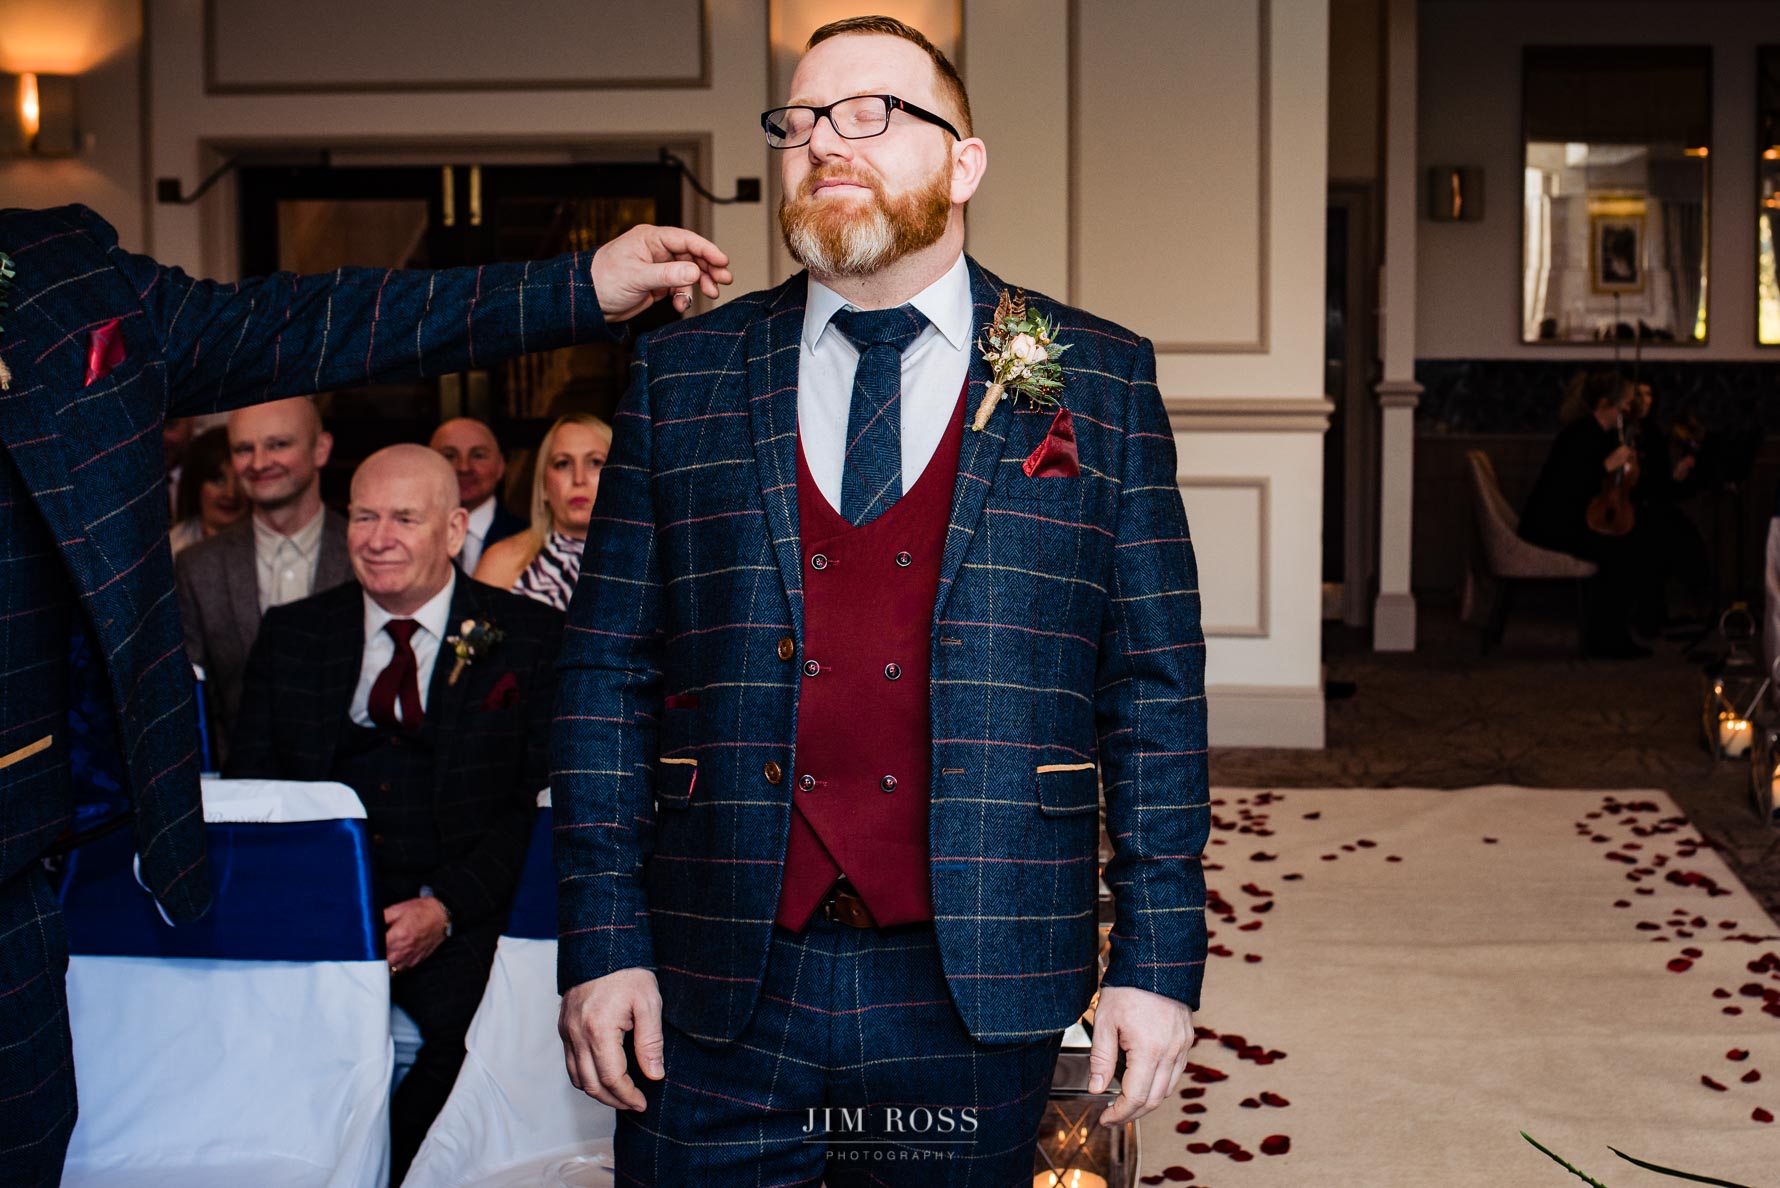 removing fluff from nervous groom